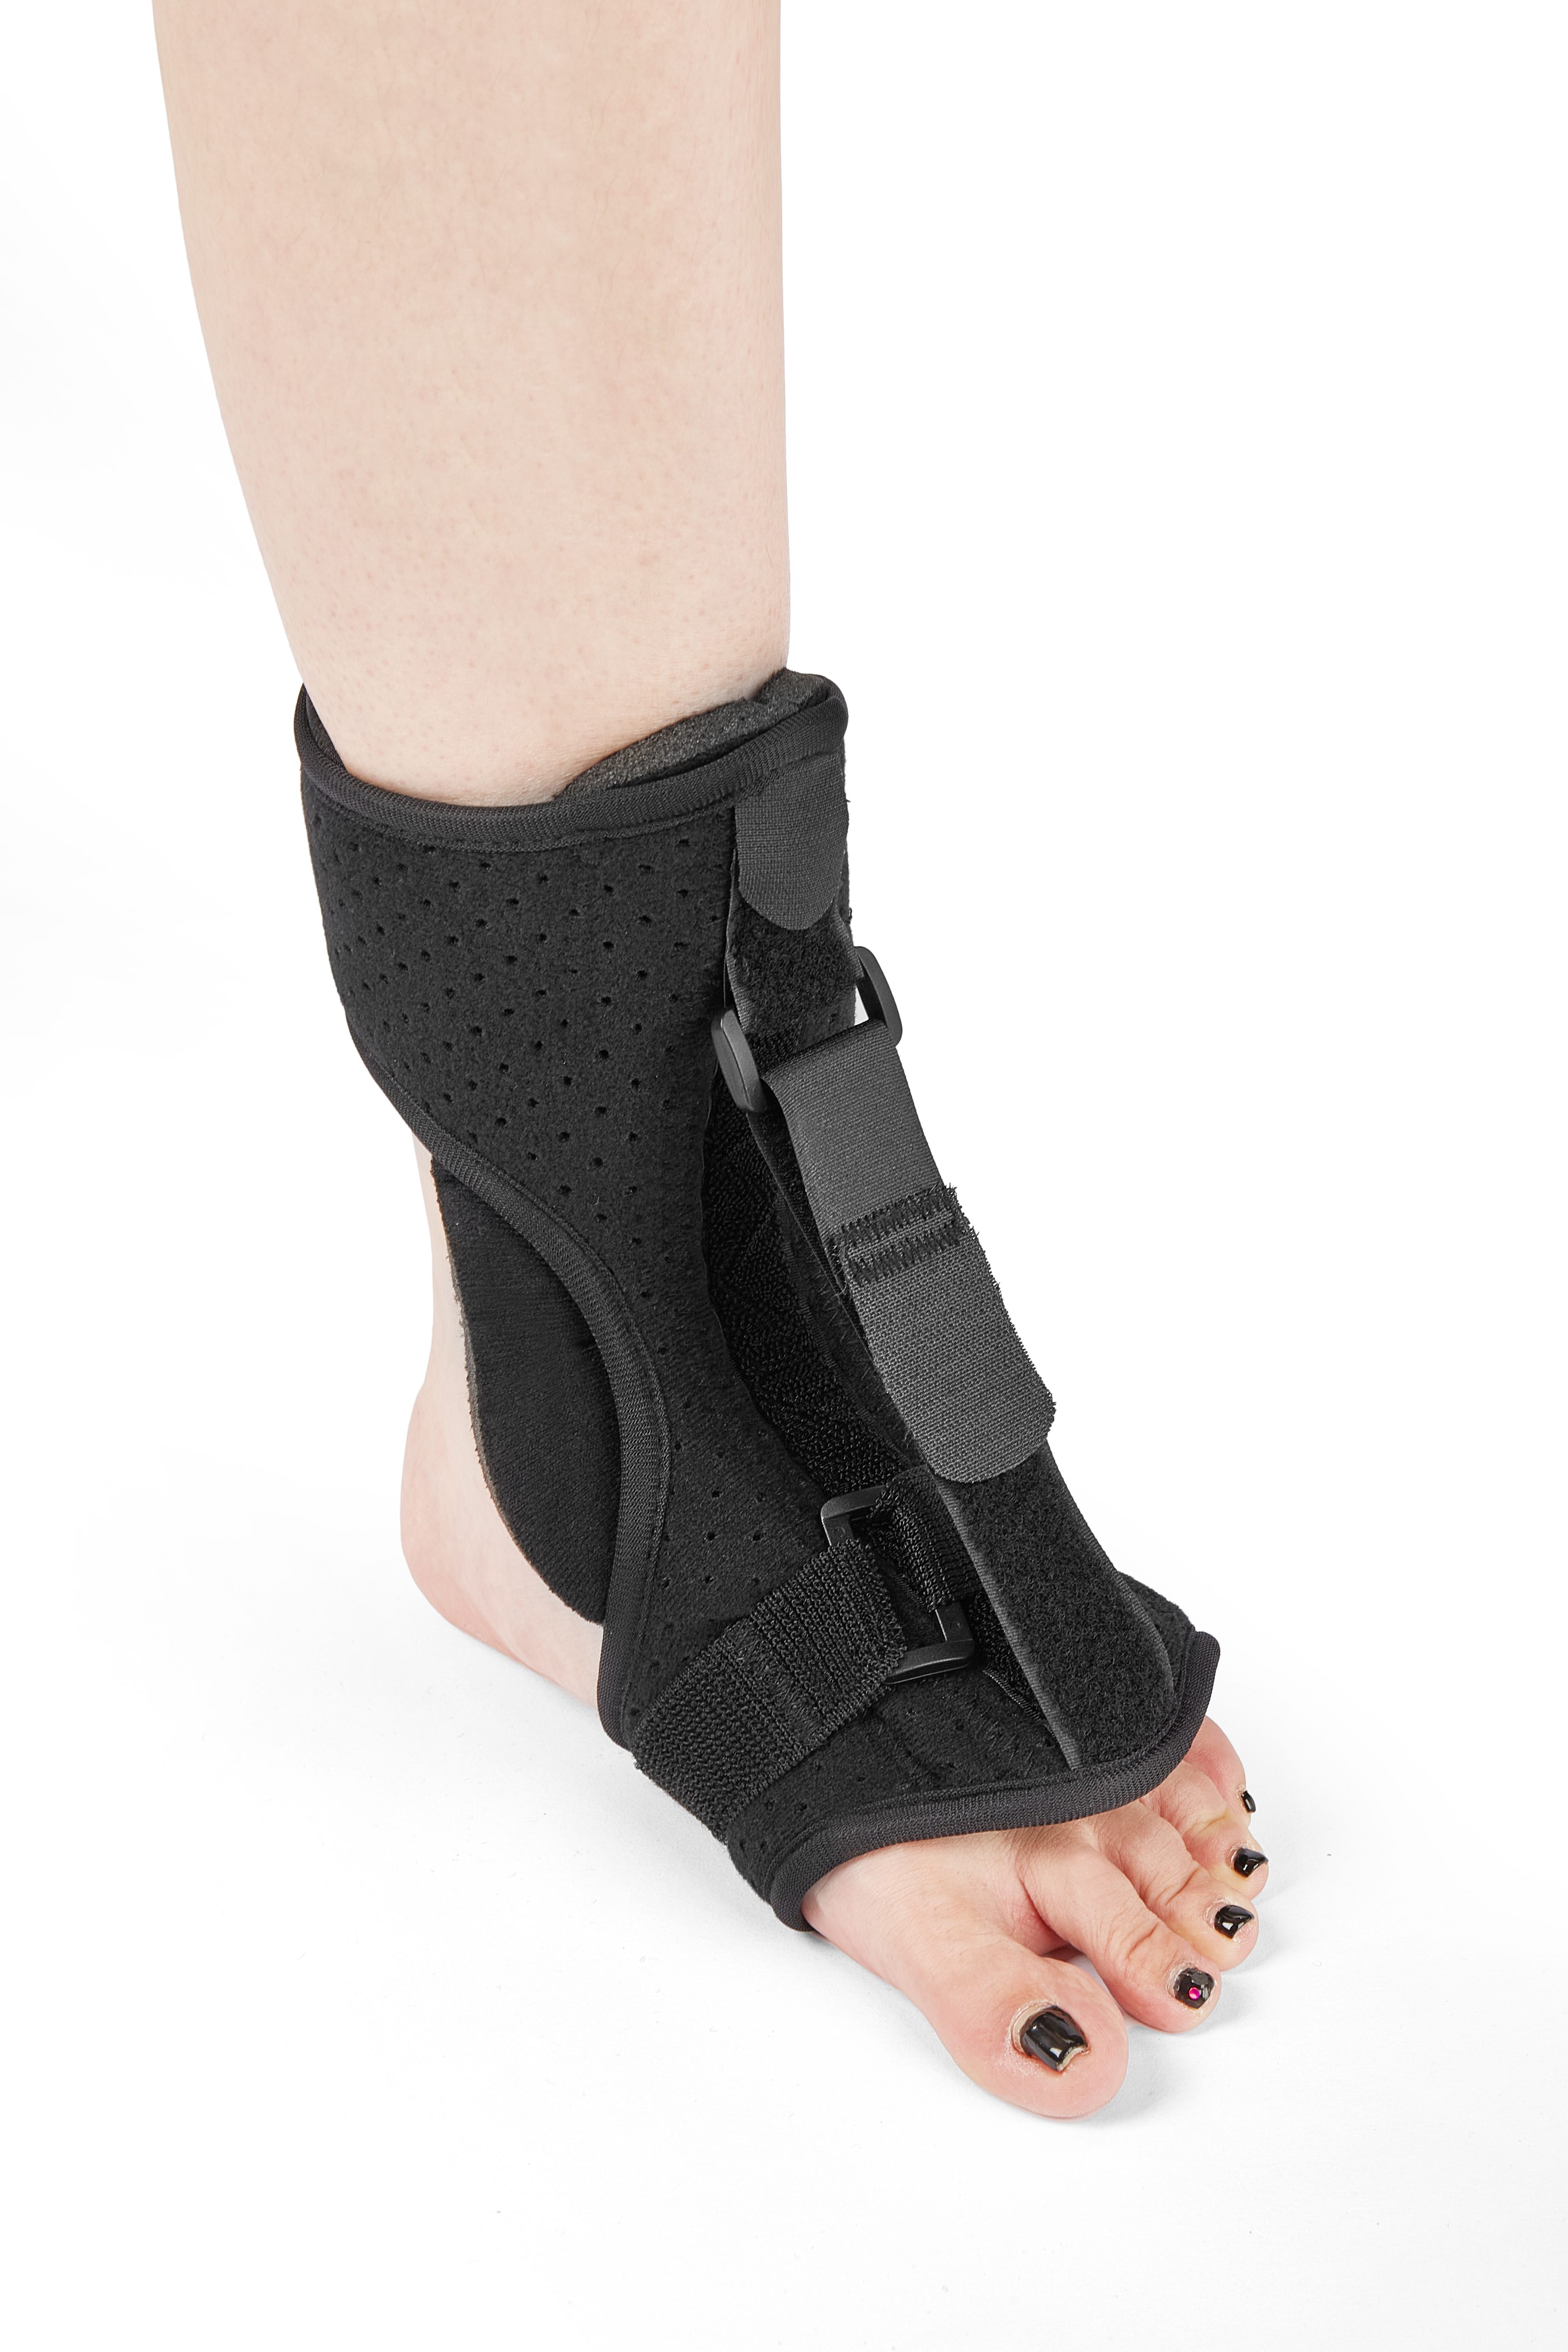 Wholesale Medical Orthosis Foot Drop Orthotic Brace Manufacturer and  Supplier